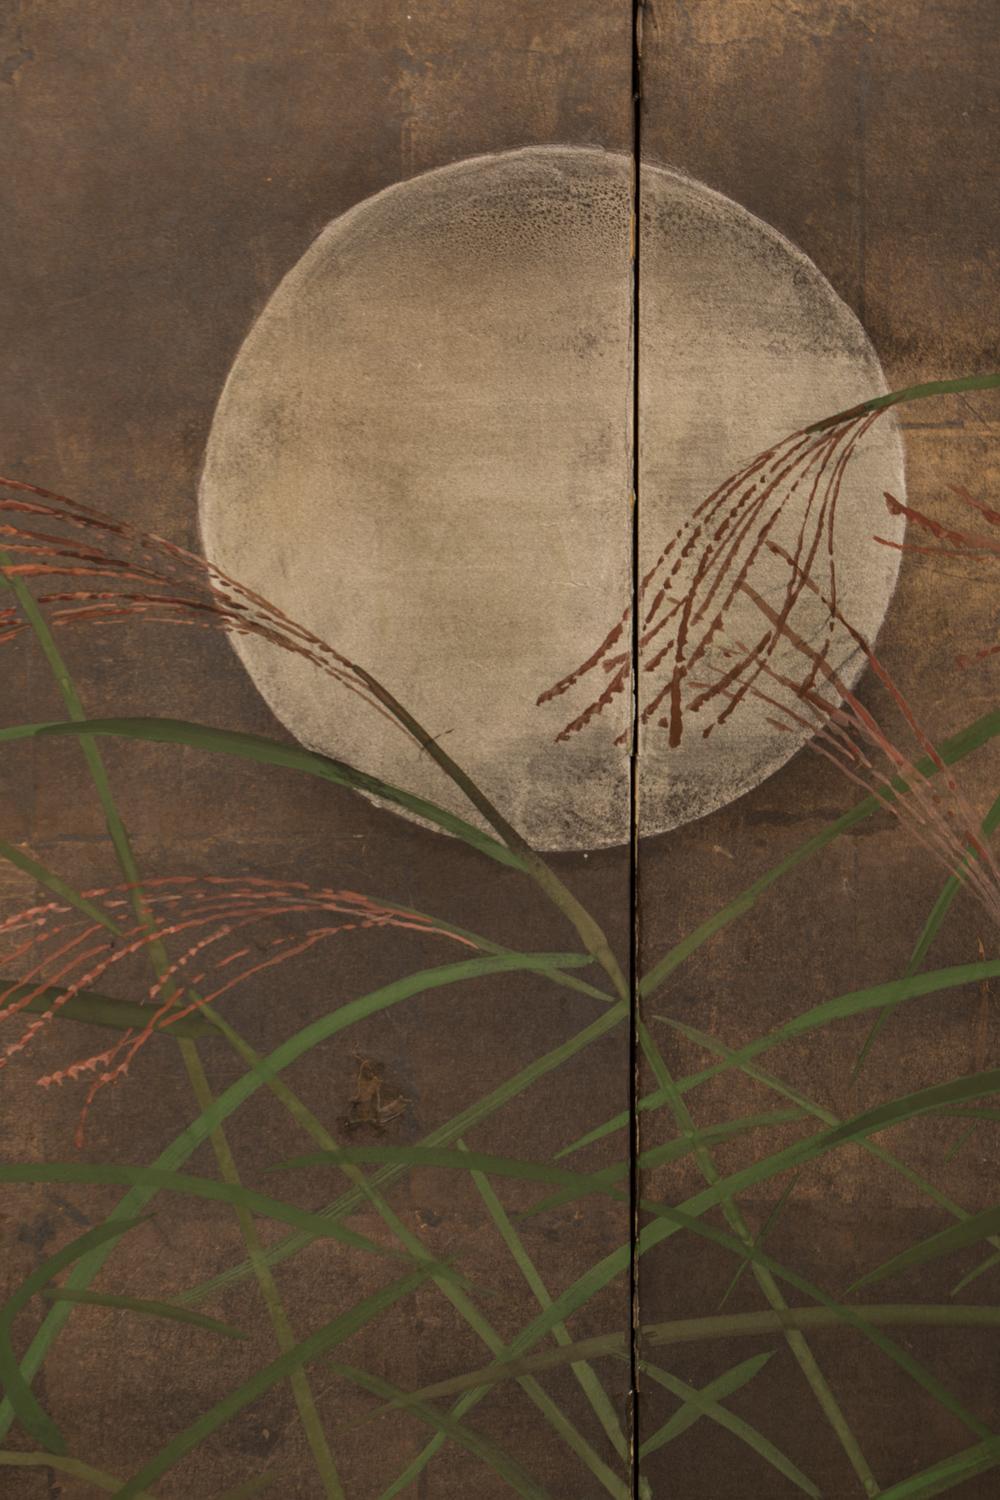 The oxidized silver gives the effect of a night sky in the background. Moonlit wild grasses bend in the wind under gentle night clouds. Could possibly be a painting of the Plains of Musashino, a popular theme in Japanese art.